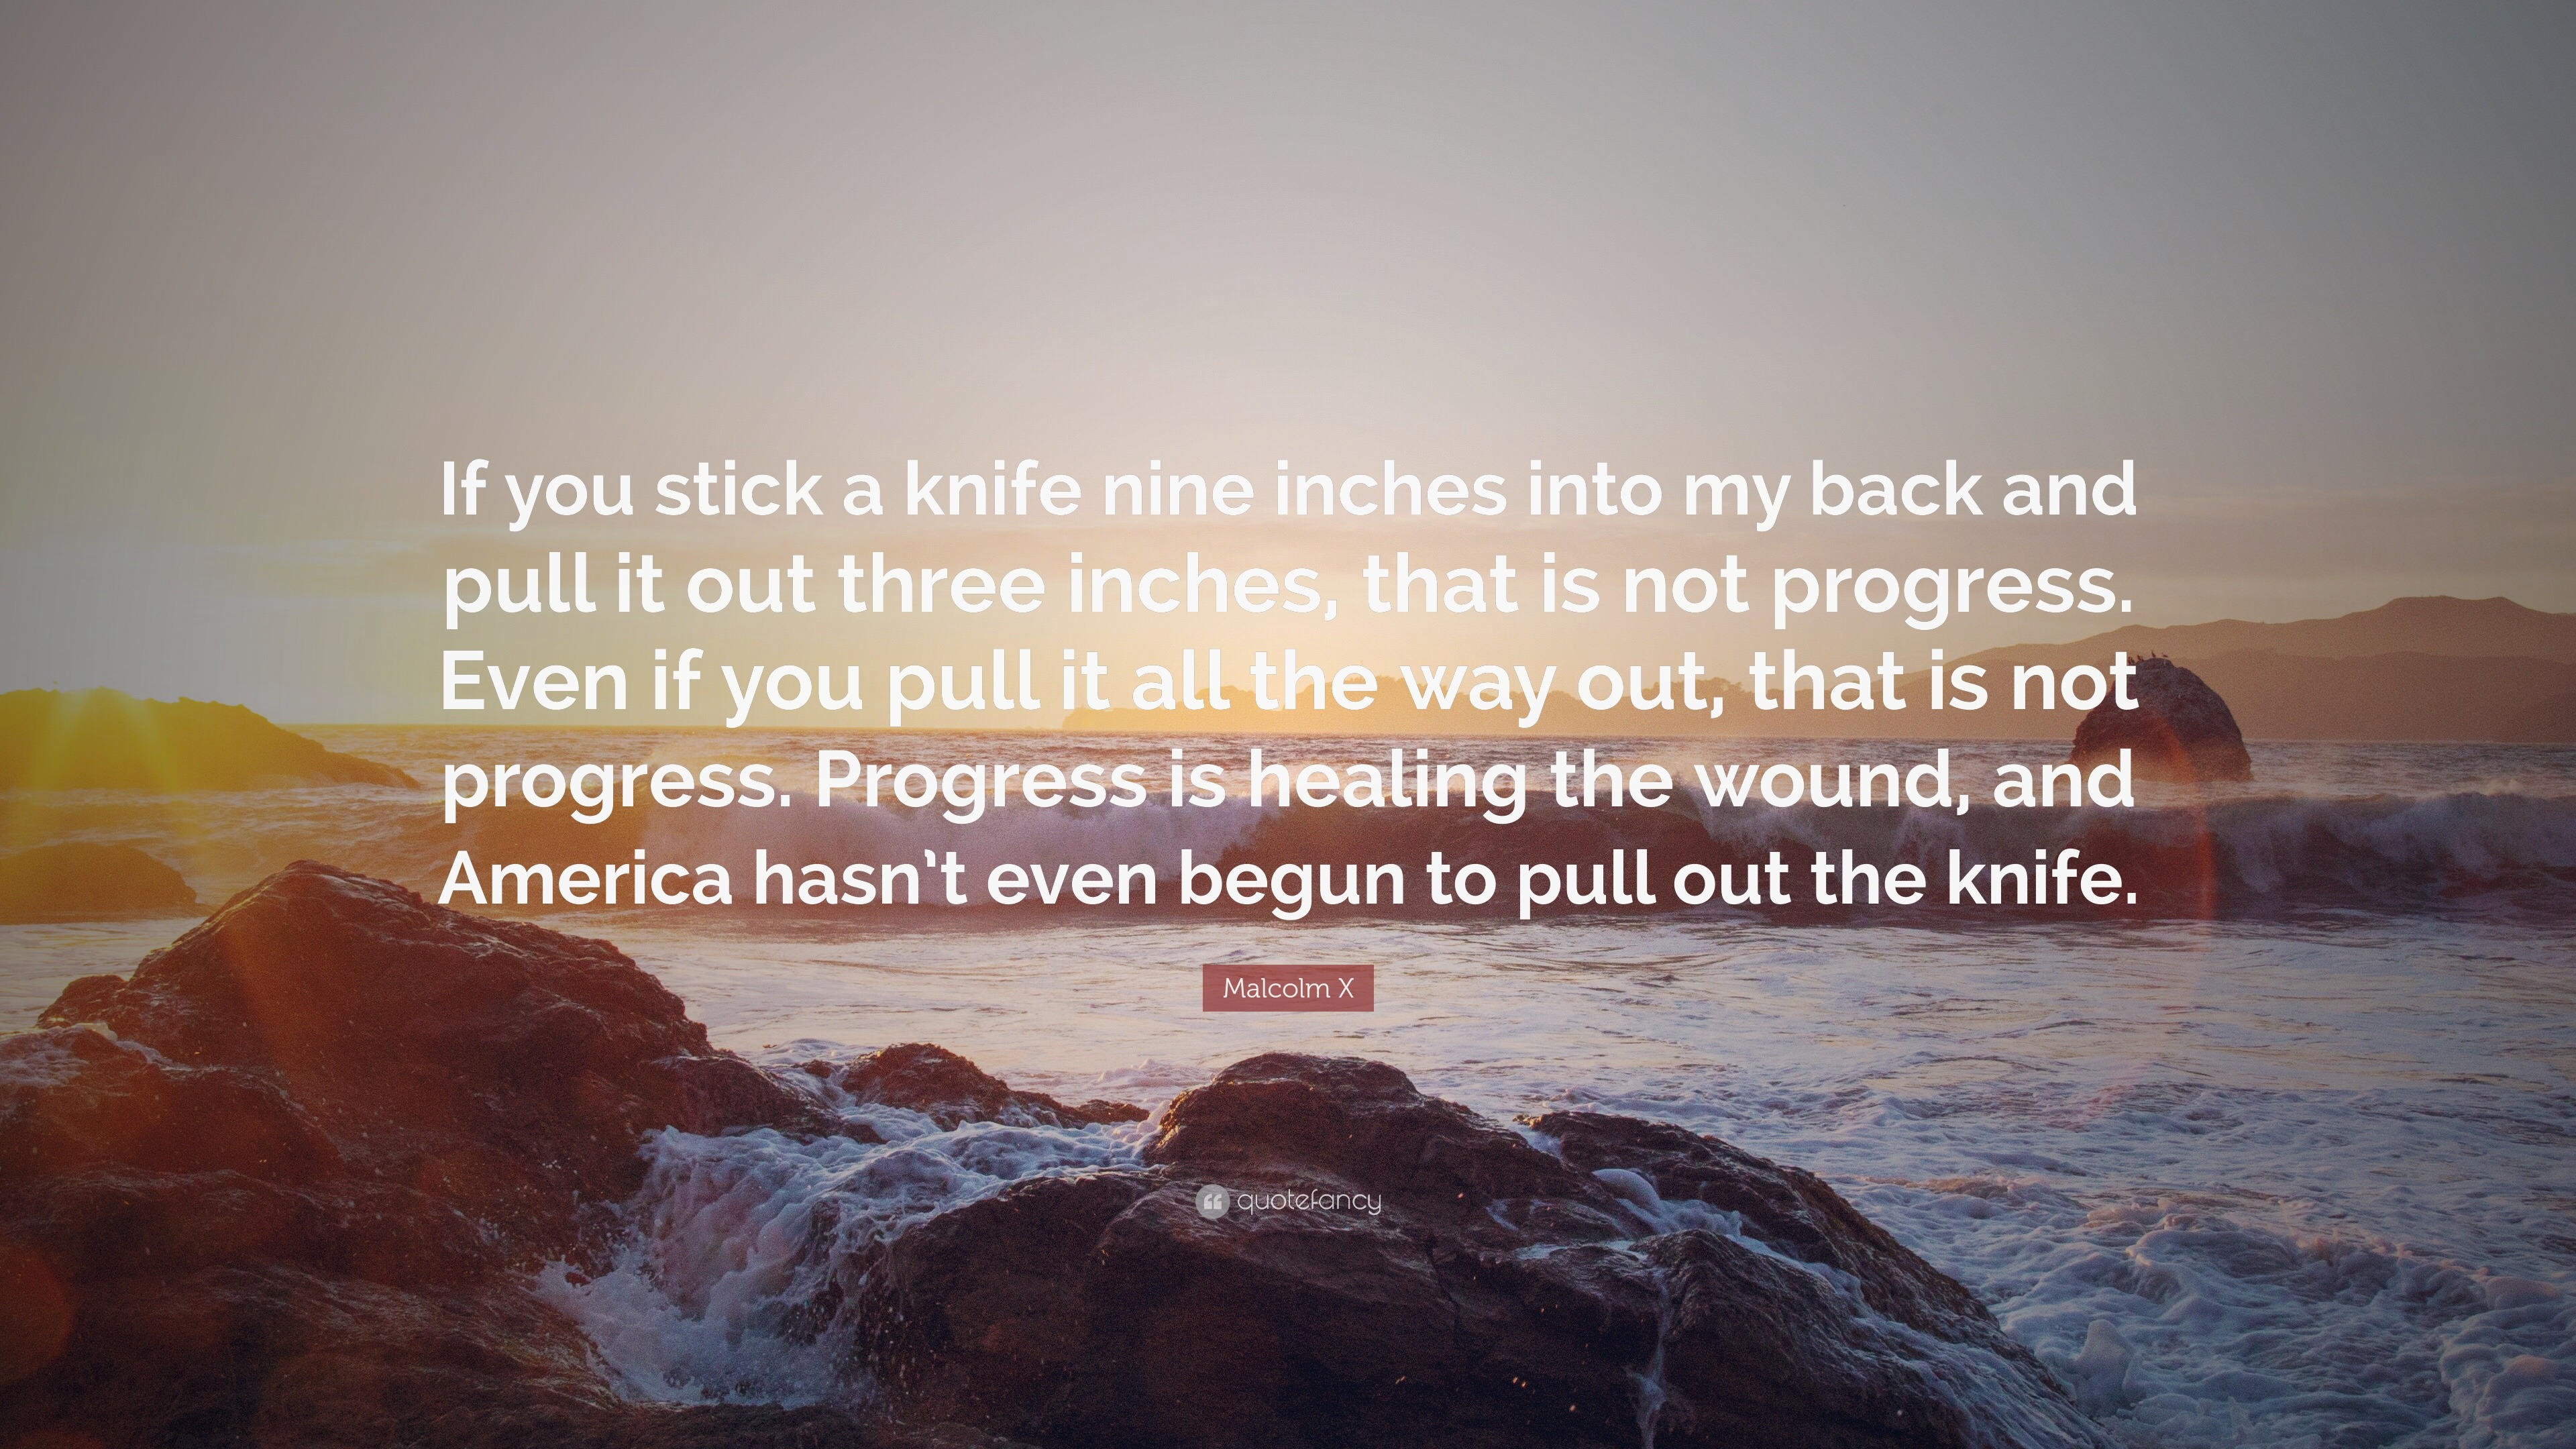 Malcolm X Quote “If you stick a knife nine inches into my